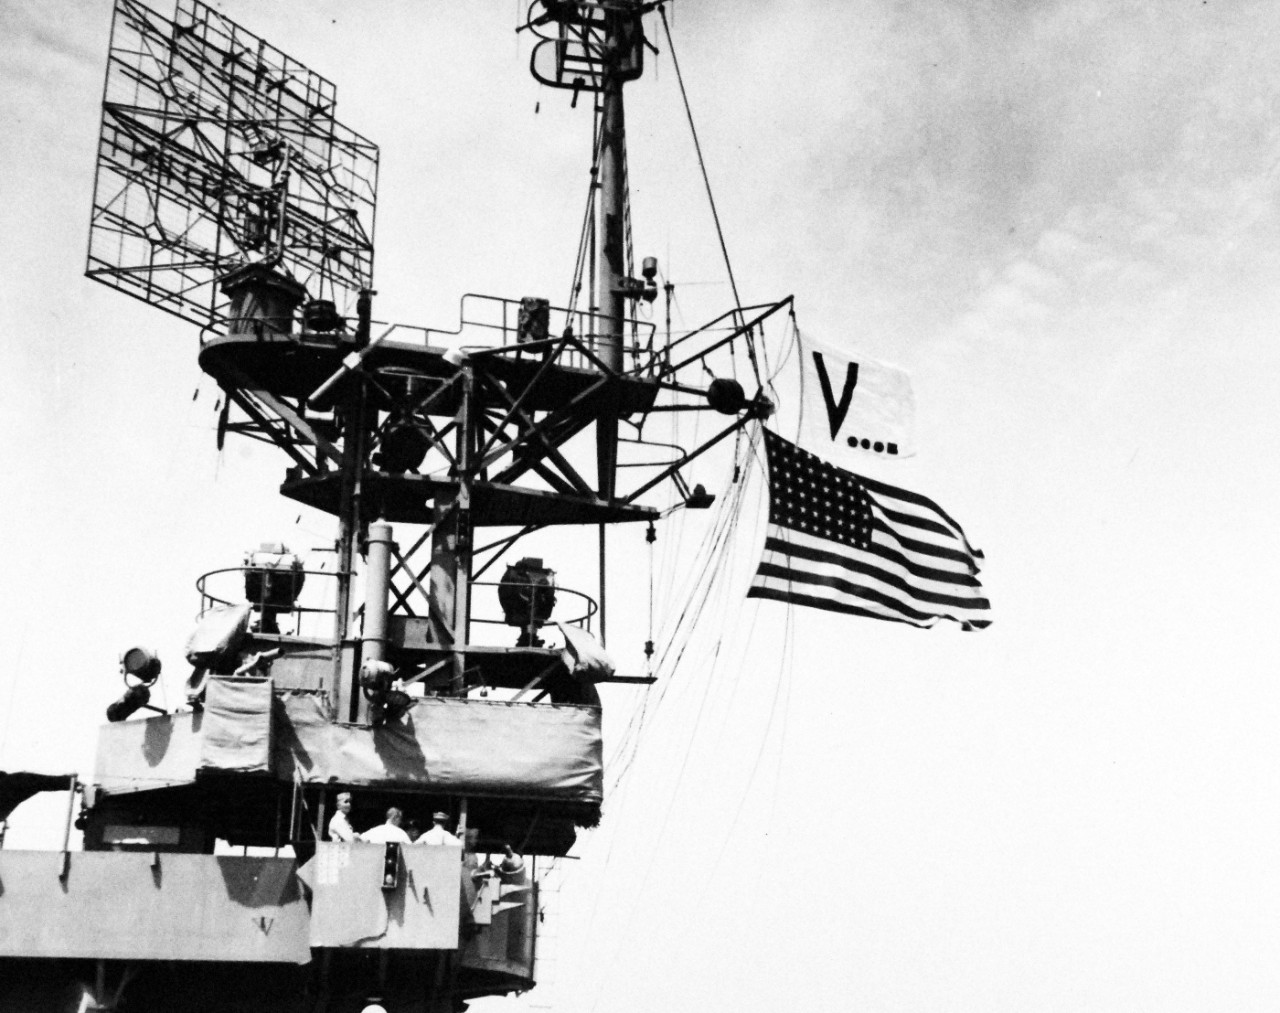 80-G-264868:   V-J Day, August 1945.   V-J Flag flying from USS Chenango (CVE-28).  Photographed by crewmember of USS Chenango (CVE-28), released October 19, 1945.   Official U.S. Navy photograph, now in the collections of the National Archives.   (2015/12/01).